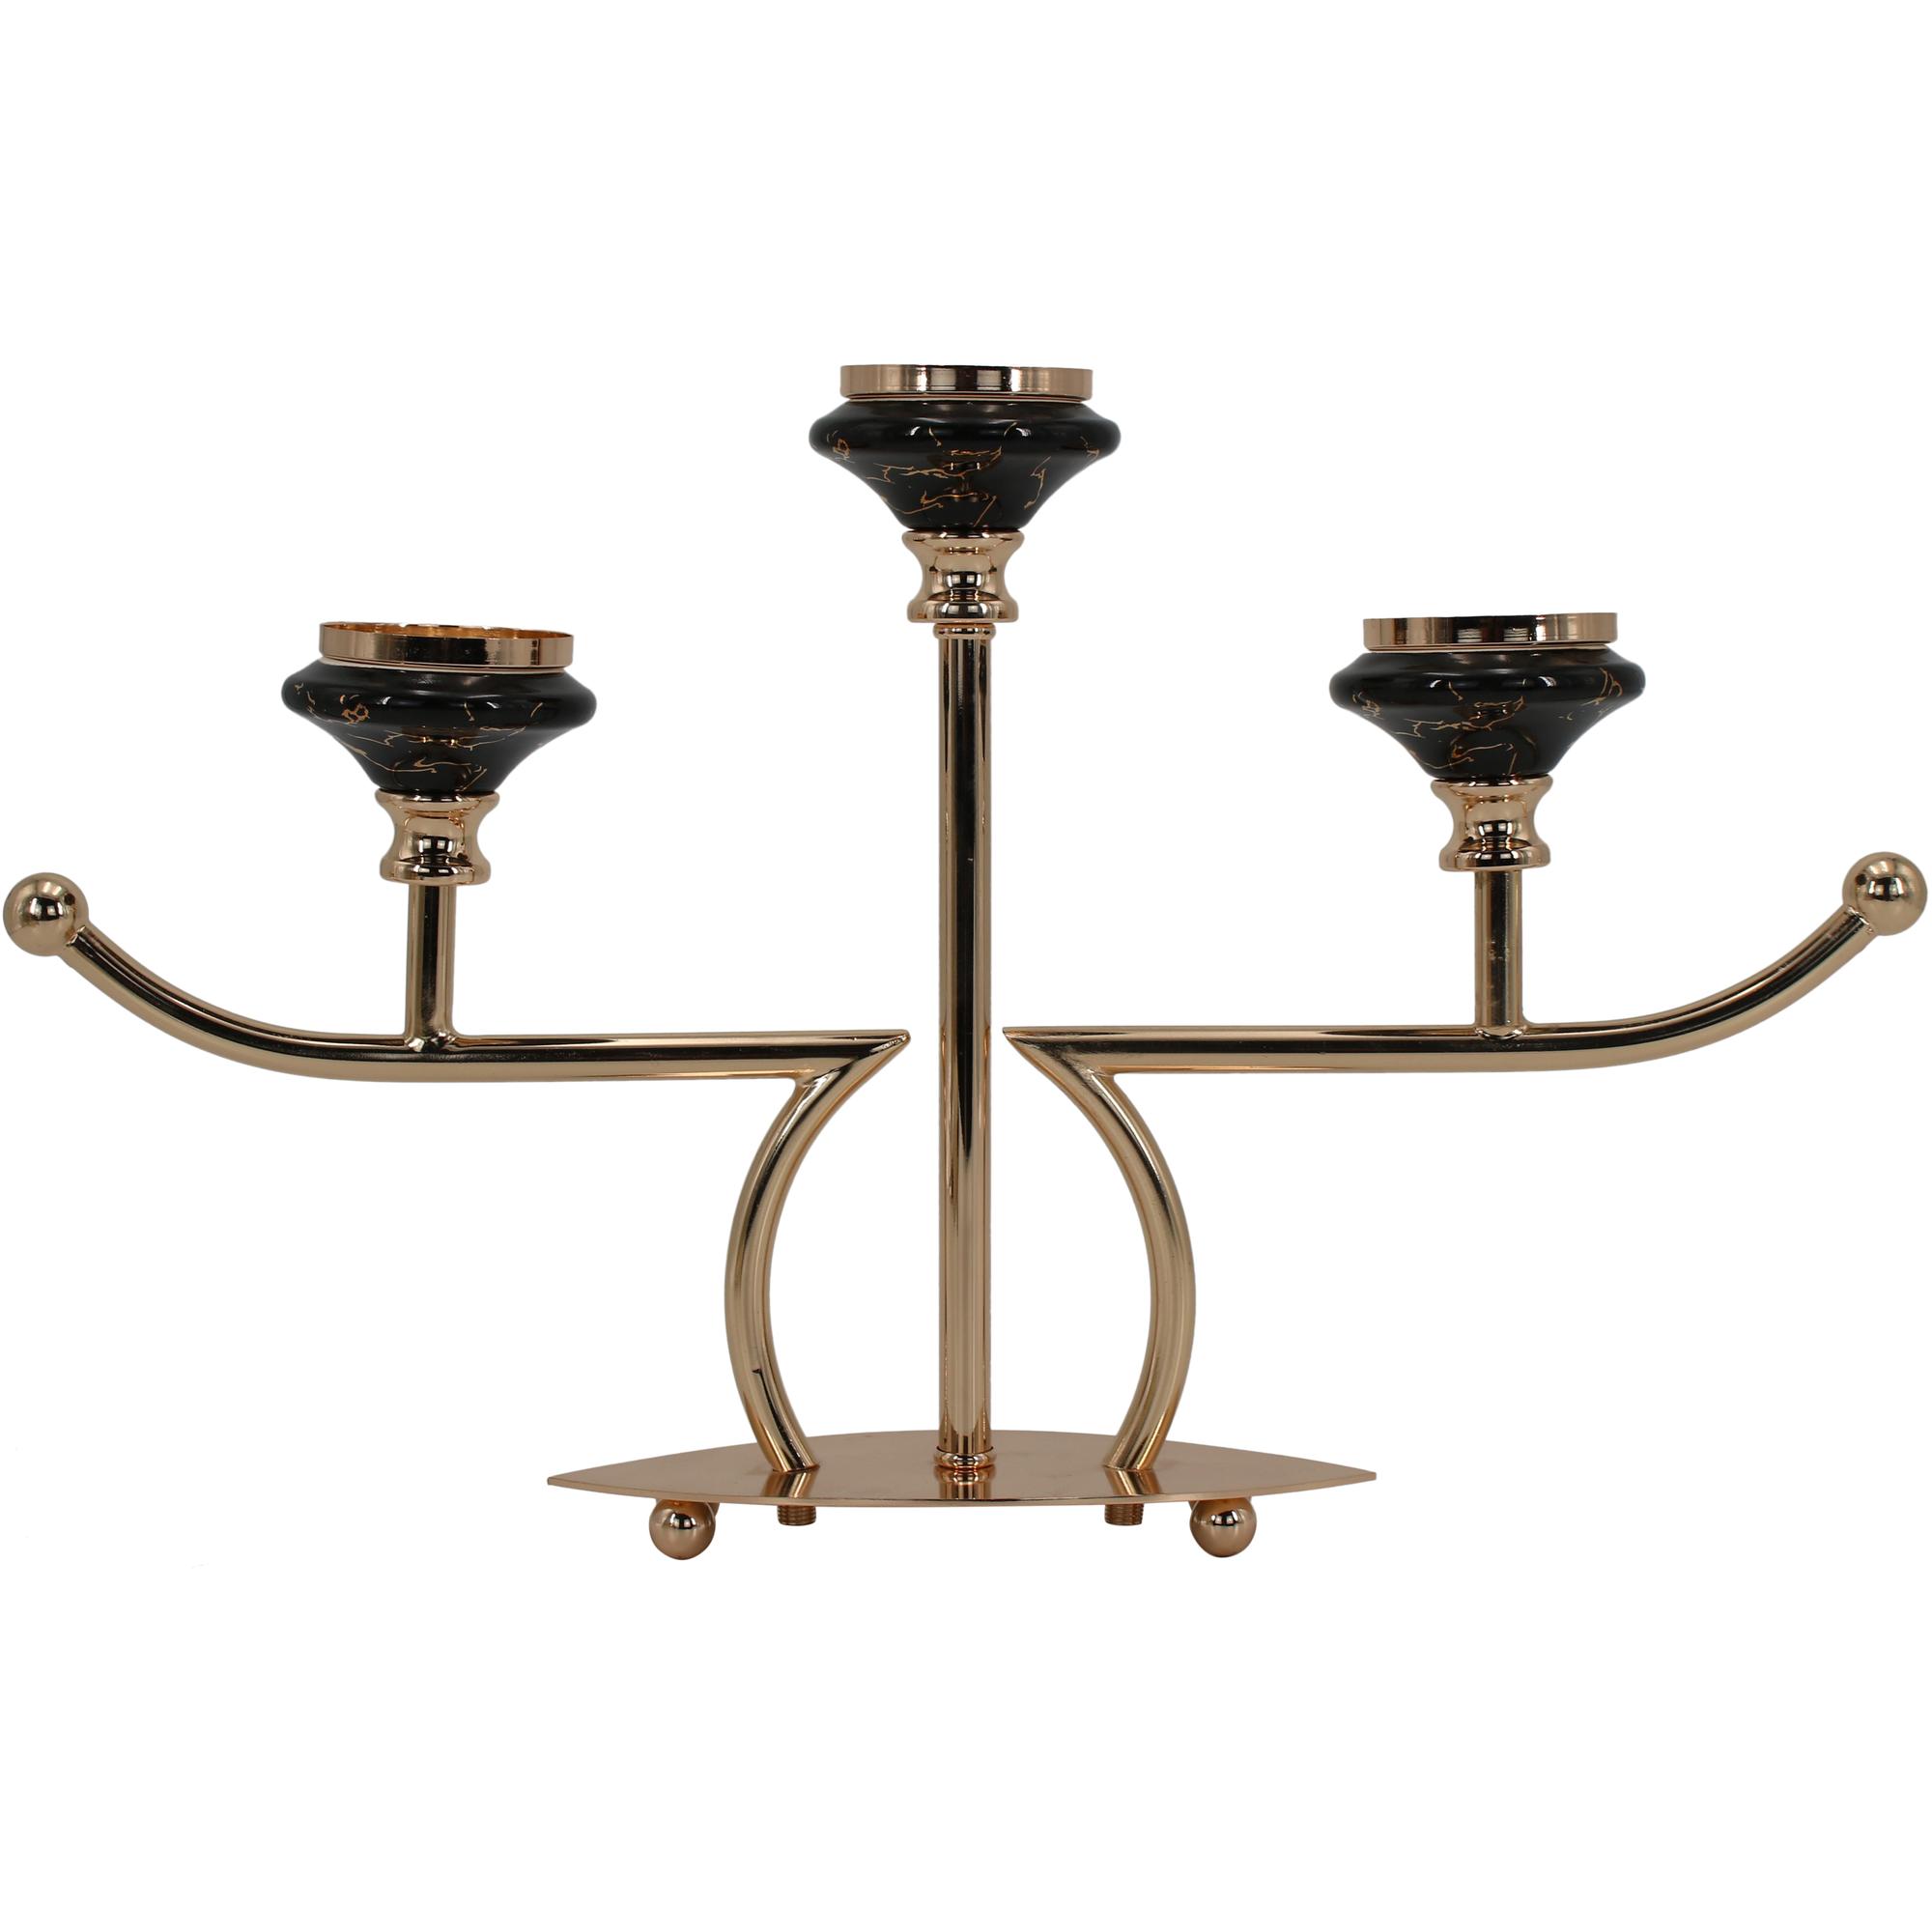 CANDLE HOLDER - 541-600018